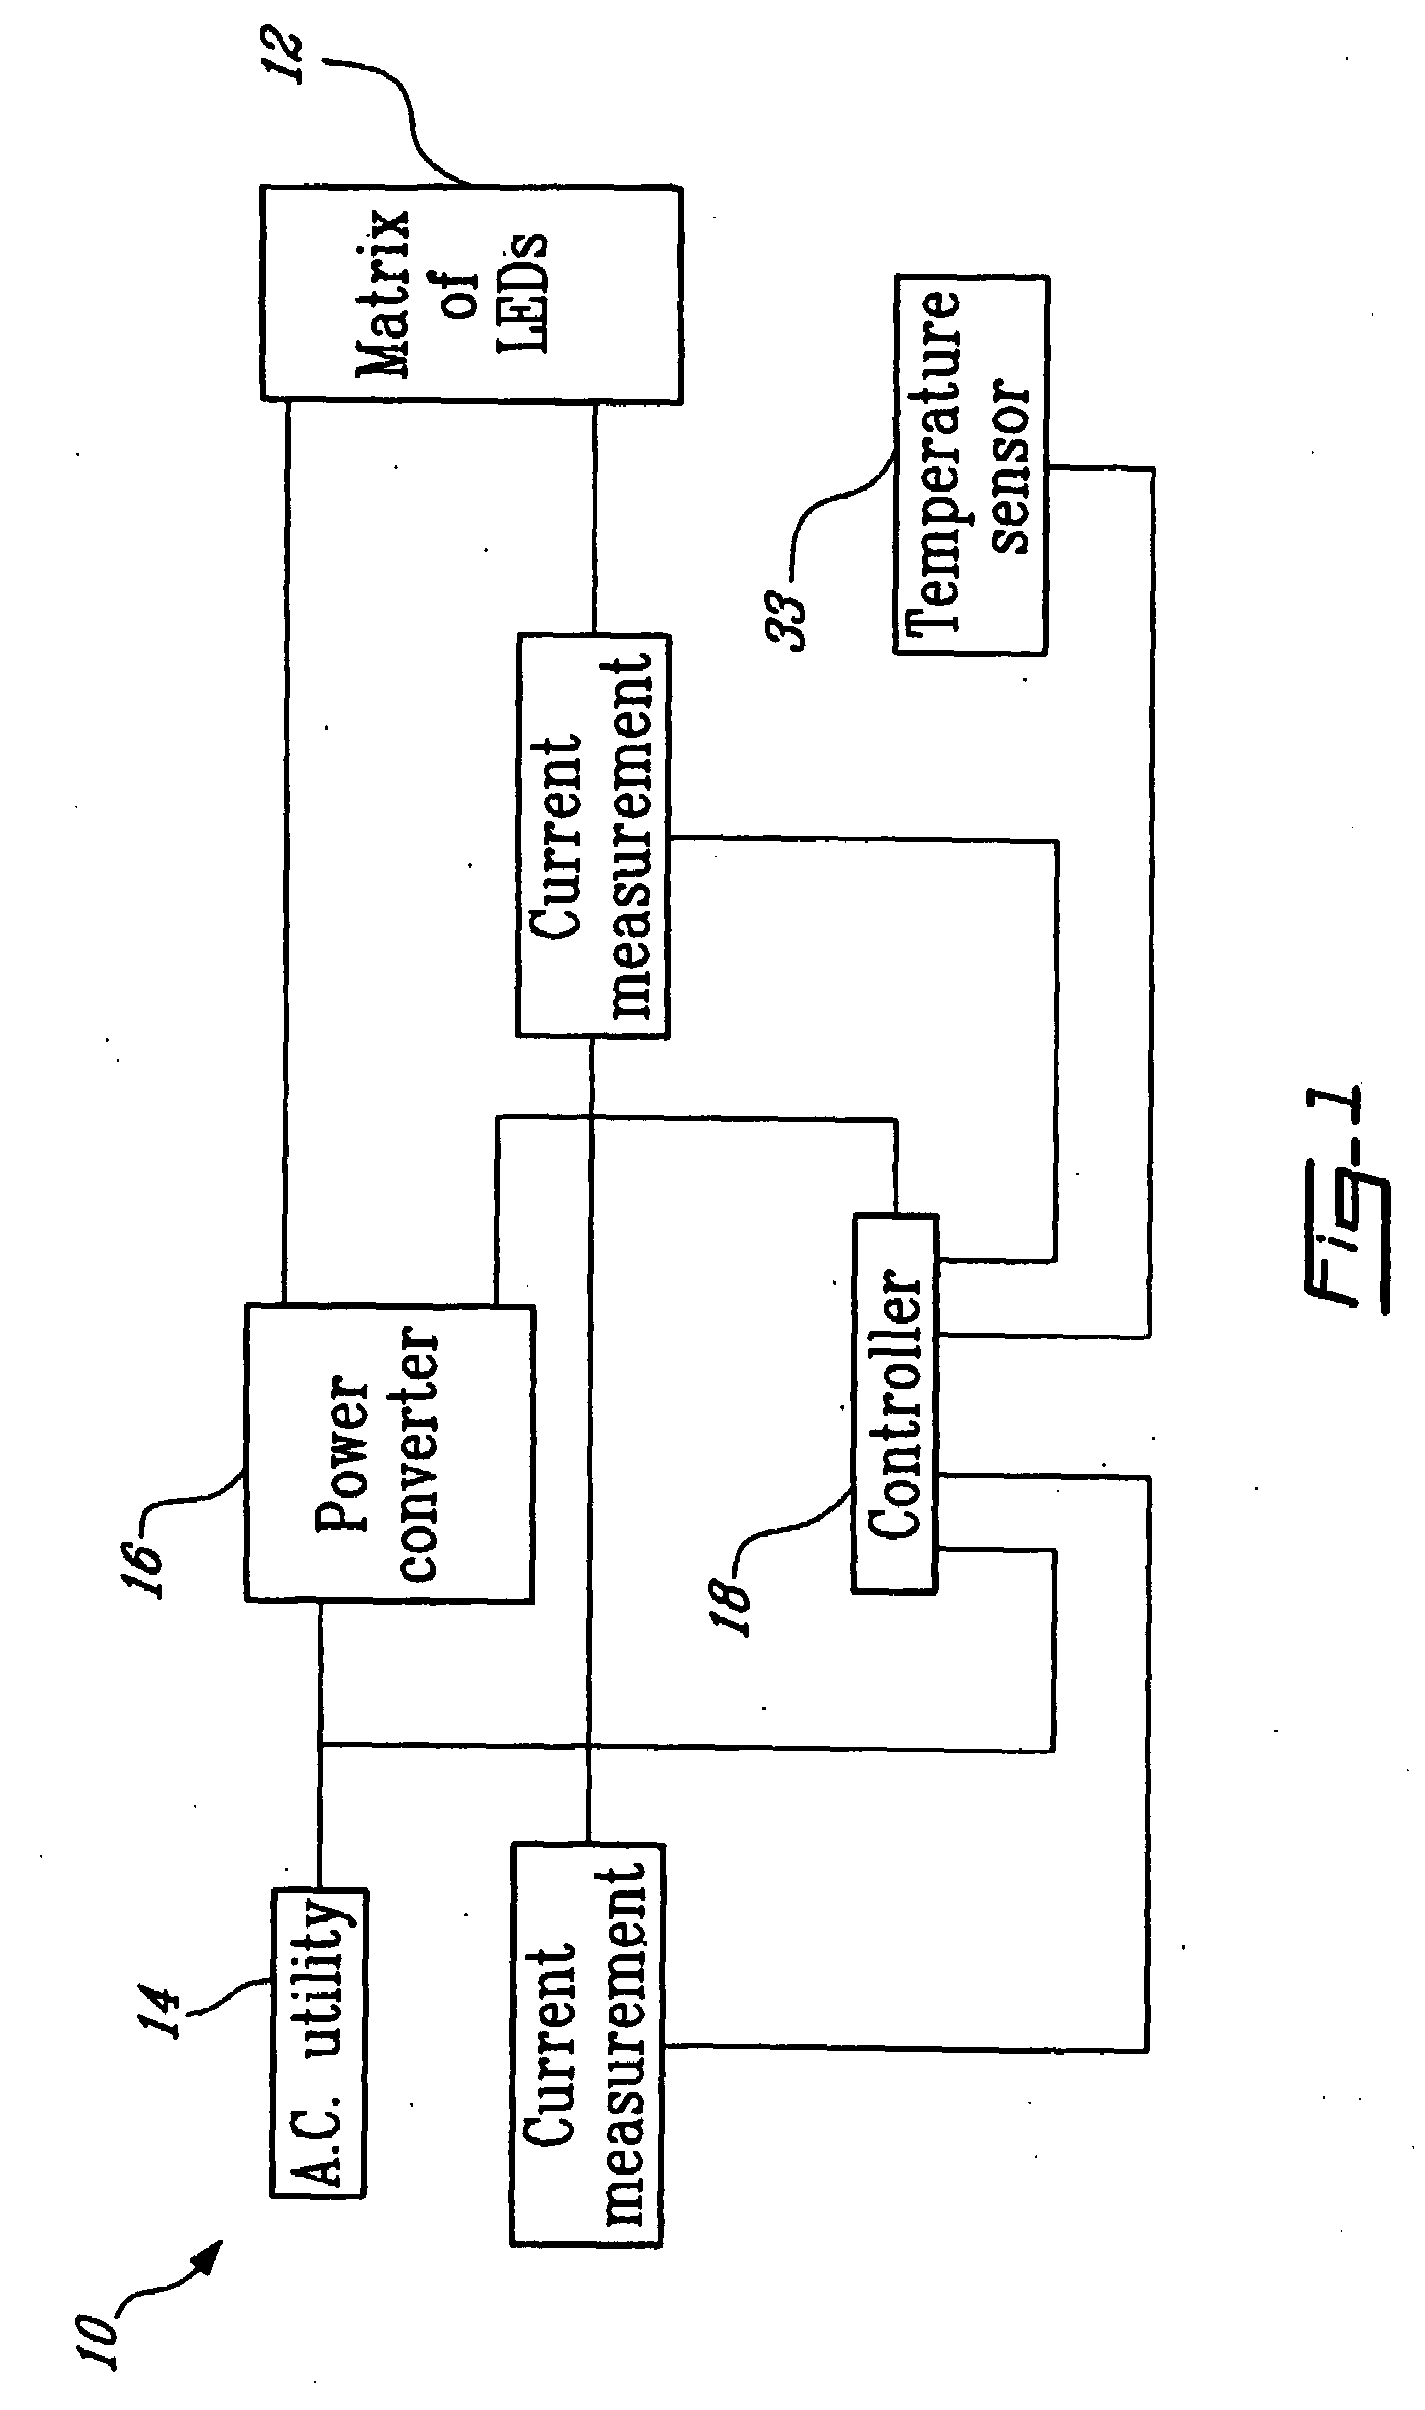 System And Method For Controlling A Matrix Of Light Emitting Diodes And Light Provided Therewith